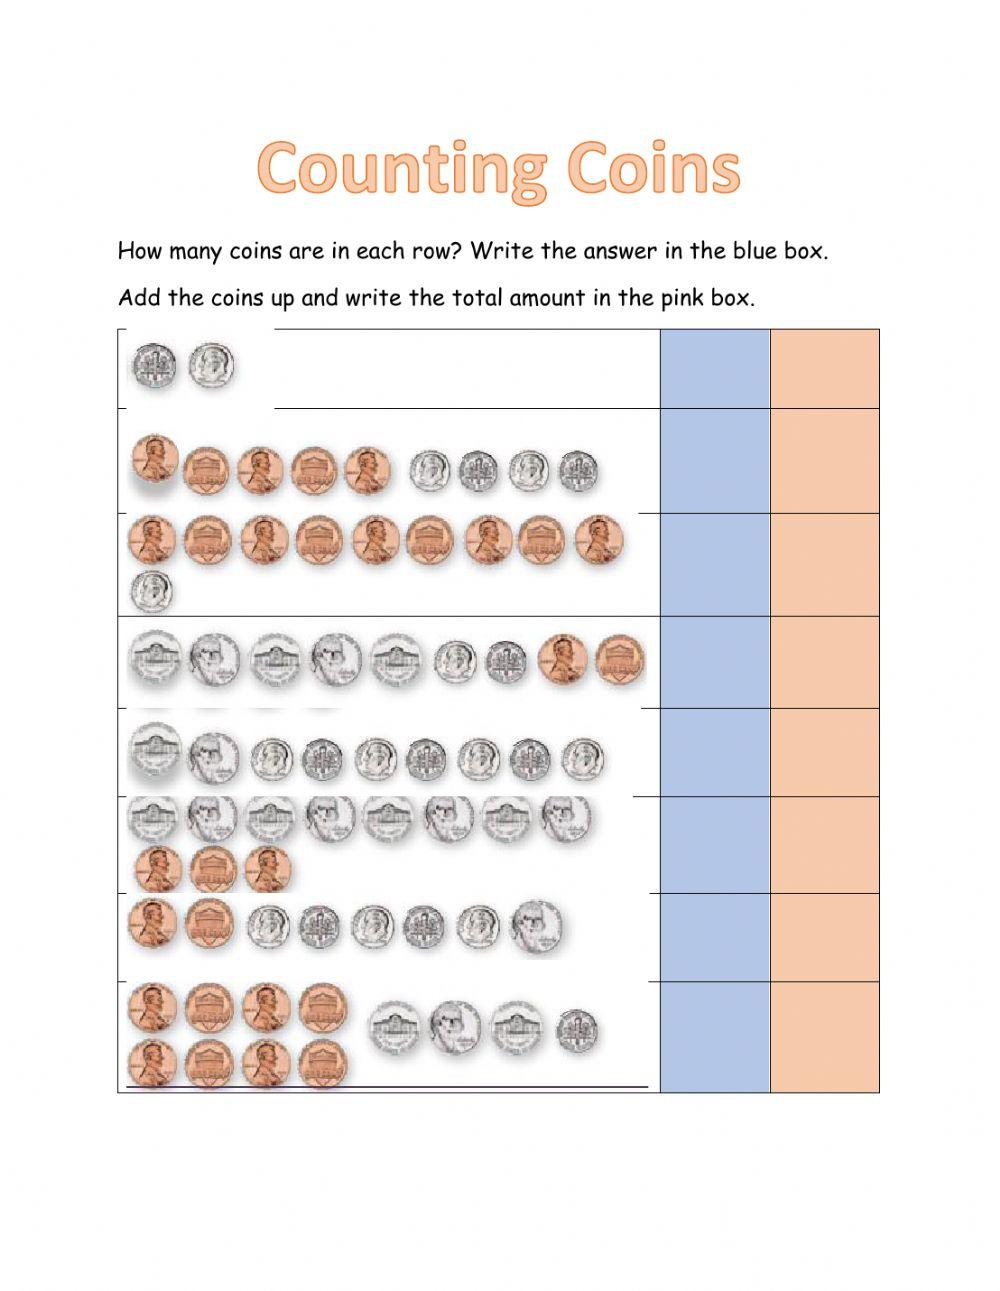 MA1-Thursday (Counting coins)